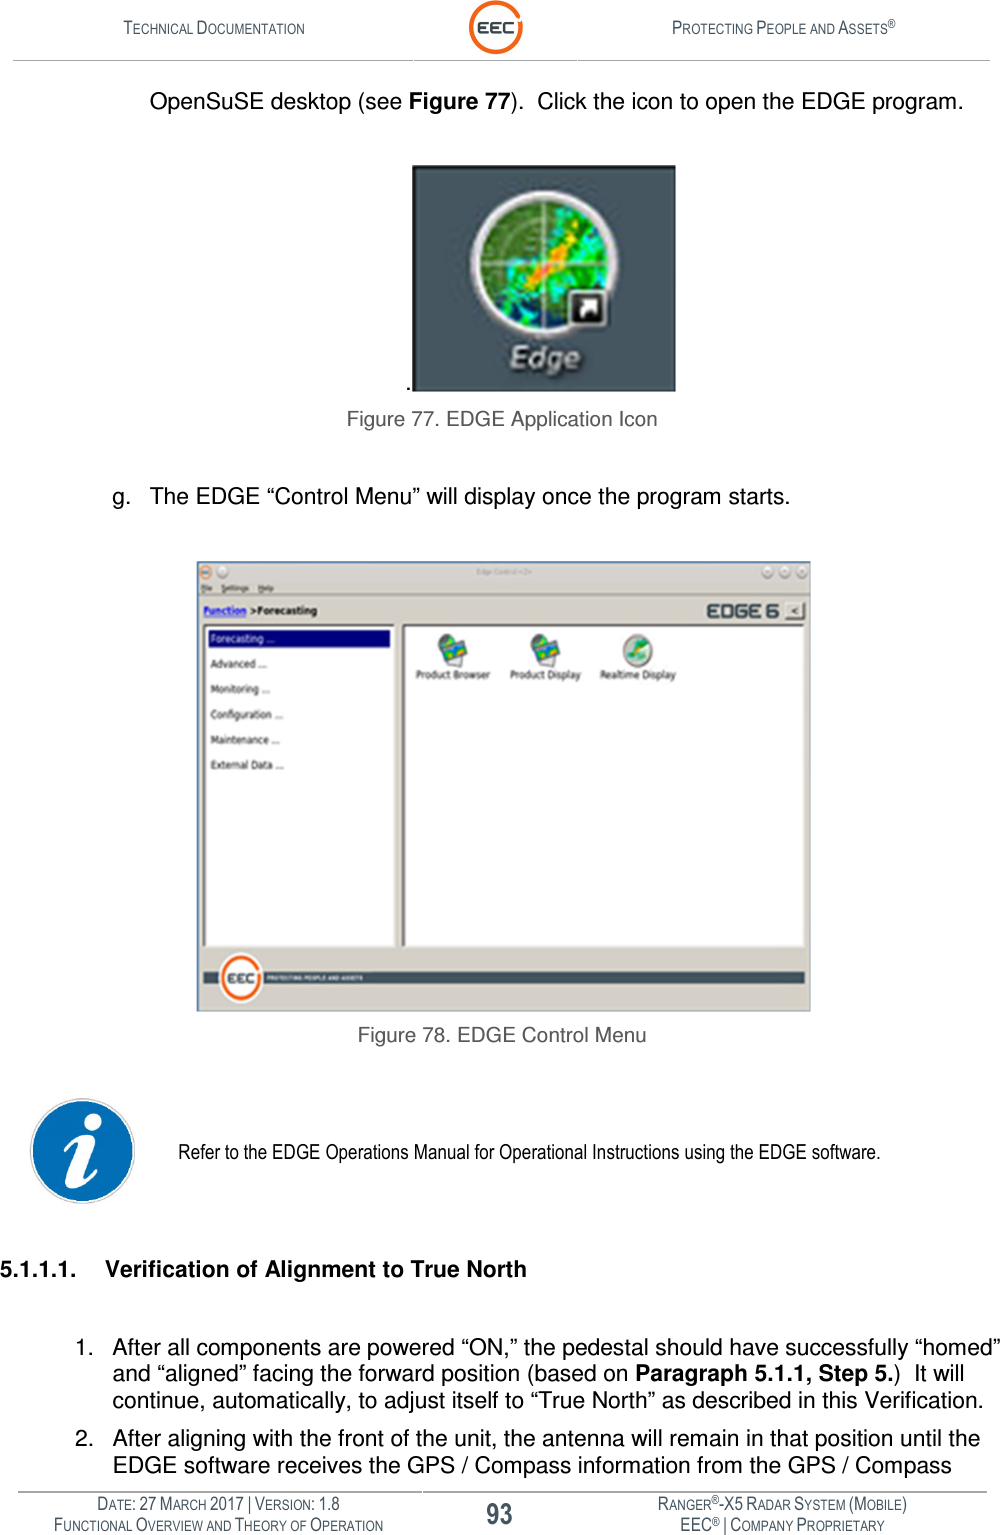 TECHNICAL DOCUMENTATION  PROTECTING PEOPLE AND ASSETS®  DATE: 27 MARCH 2017 | VERSION: 1.8 93 RANGER®-X5 RADAR SYSTEM (MOBILE) FUNCTIONAL OVERVIEW AND THEORY OF OPERATION EEC® | COMPANY PROPRIETARY  OpenSuSE desktop (see Figure 77).  Click the icon to open the EDGE program.  .  Figure 77. EDGE Application Icon  g.  The EDGE “Control Menu” will display once the program starts.   Figure 78. EDGE Control Menu   Refer to the EDGE Operations Manual for Operational Instructions using the EDGE software.  5.1.1.1.  Verification of Alignment to True North  1.  After all components are powered “ON,” the pedestal should have successfully “homed” and “aligned” facing the forward position (based on Paragraph 5.1.1, Step 5.)  It will continue, automatically, to adjust itself to “True North” as described in this Verification. 2.  After aligning with the front of the unit, the antenna will remain in that position until the EDGE software receives the GPS / Compass information from the GPS / Compass 